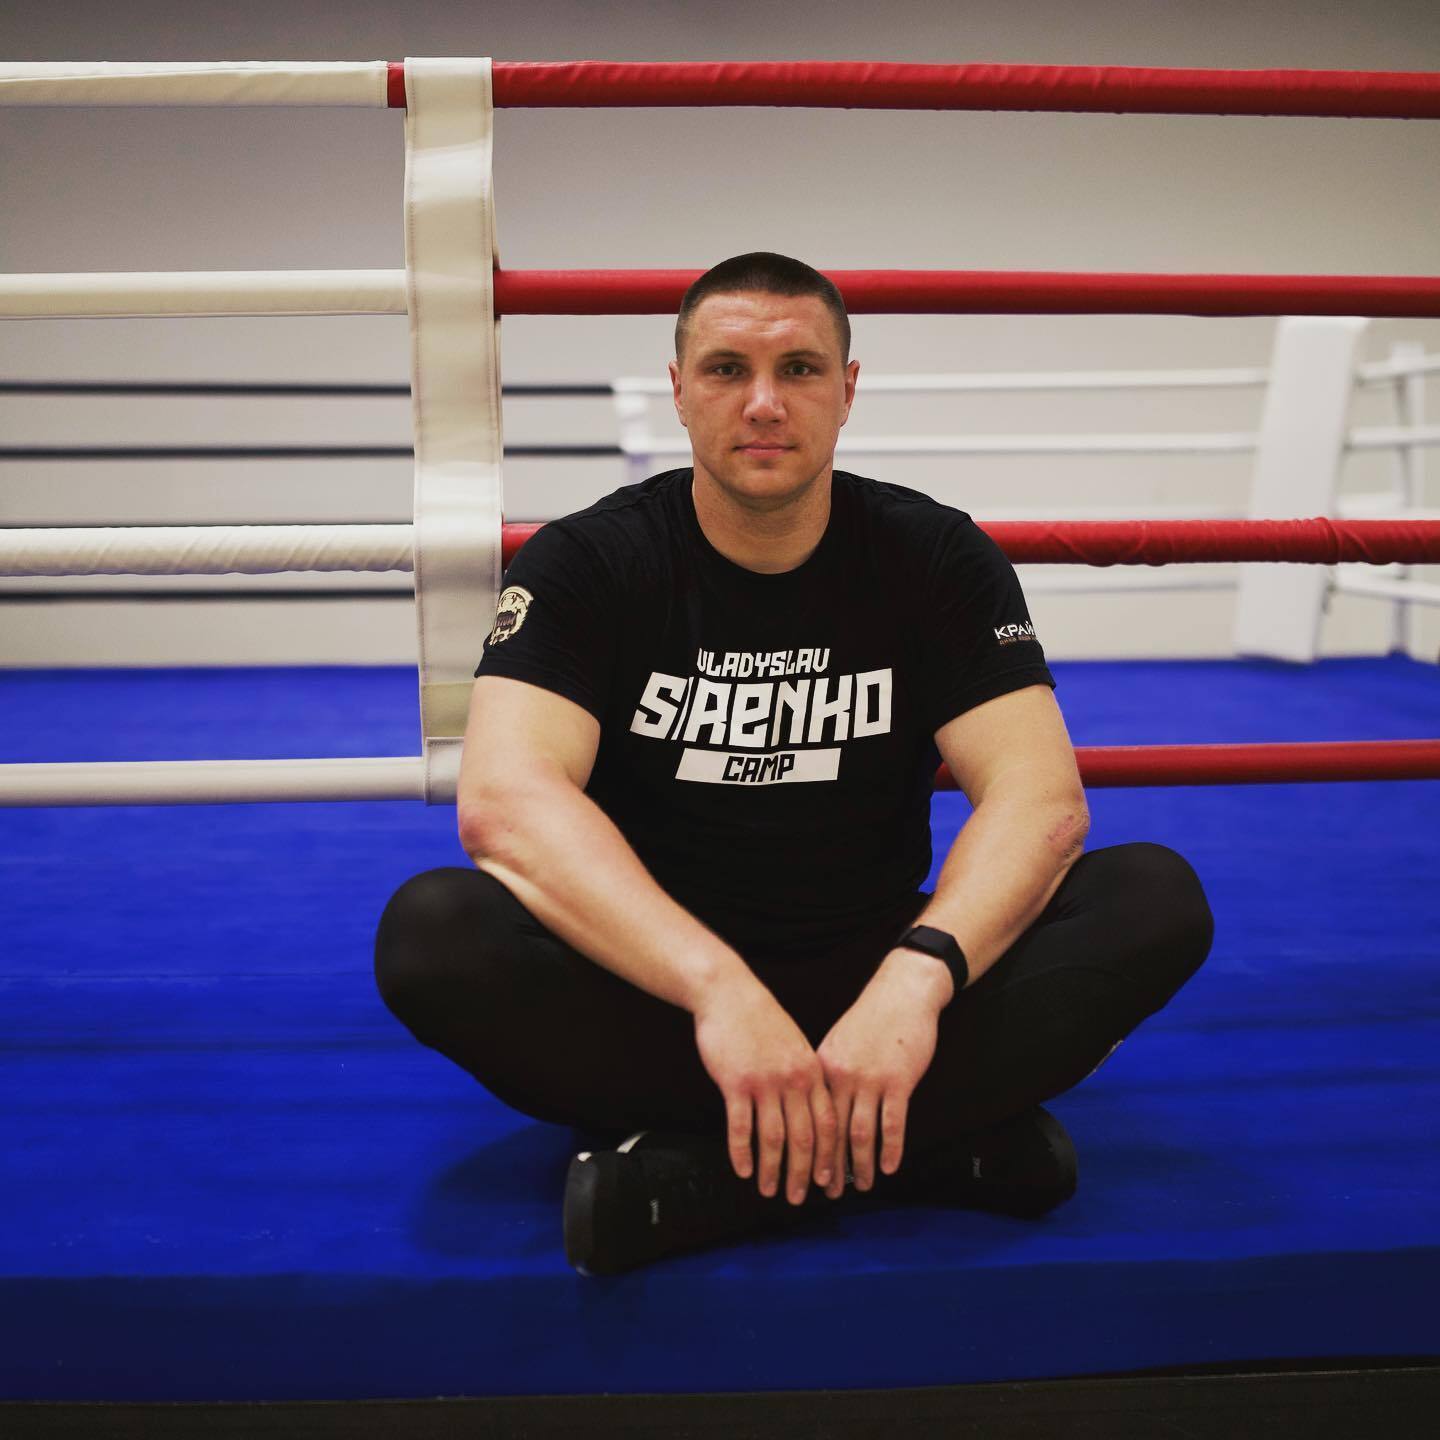 The undefeated Ukrainian heavyweight won the fight early with four knockdowns. Video